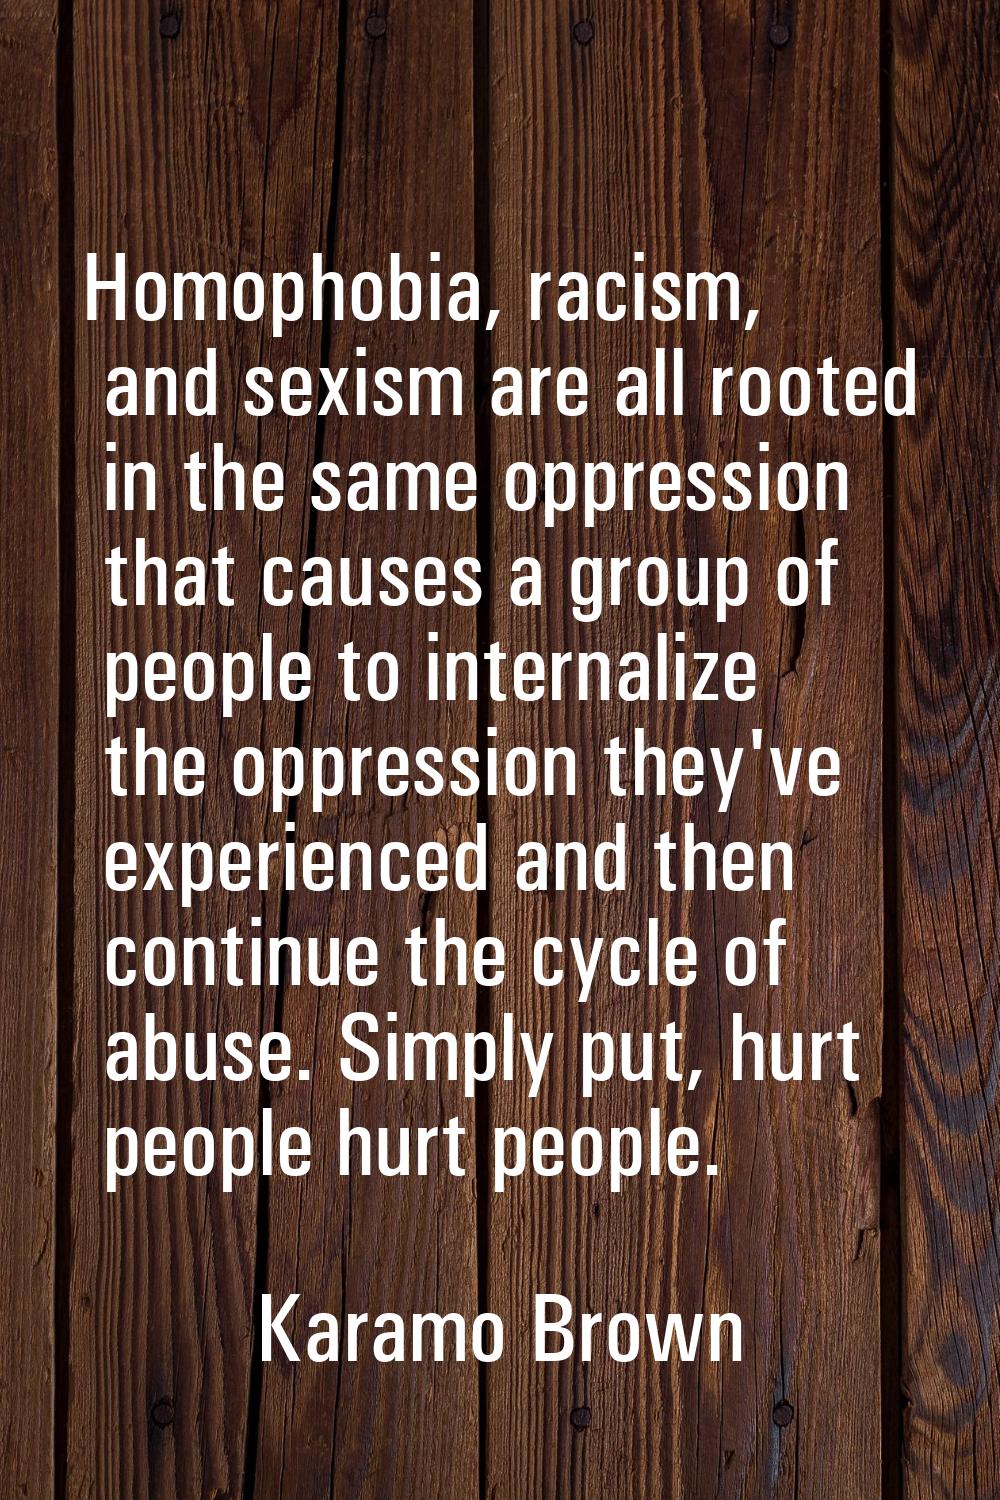 Homophobia, racism, and sexism are all rooted in the same oppression that causes a group of people 